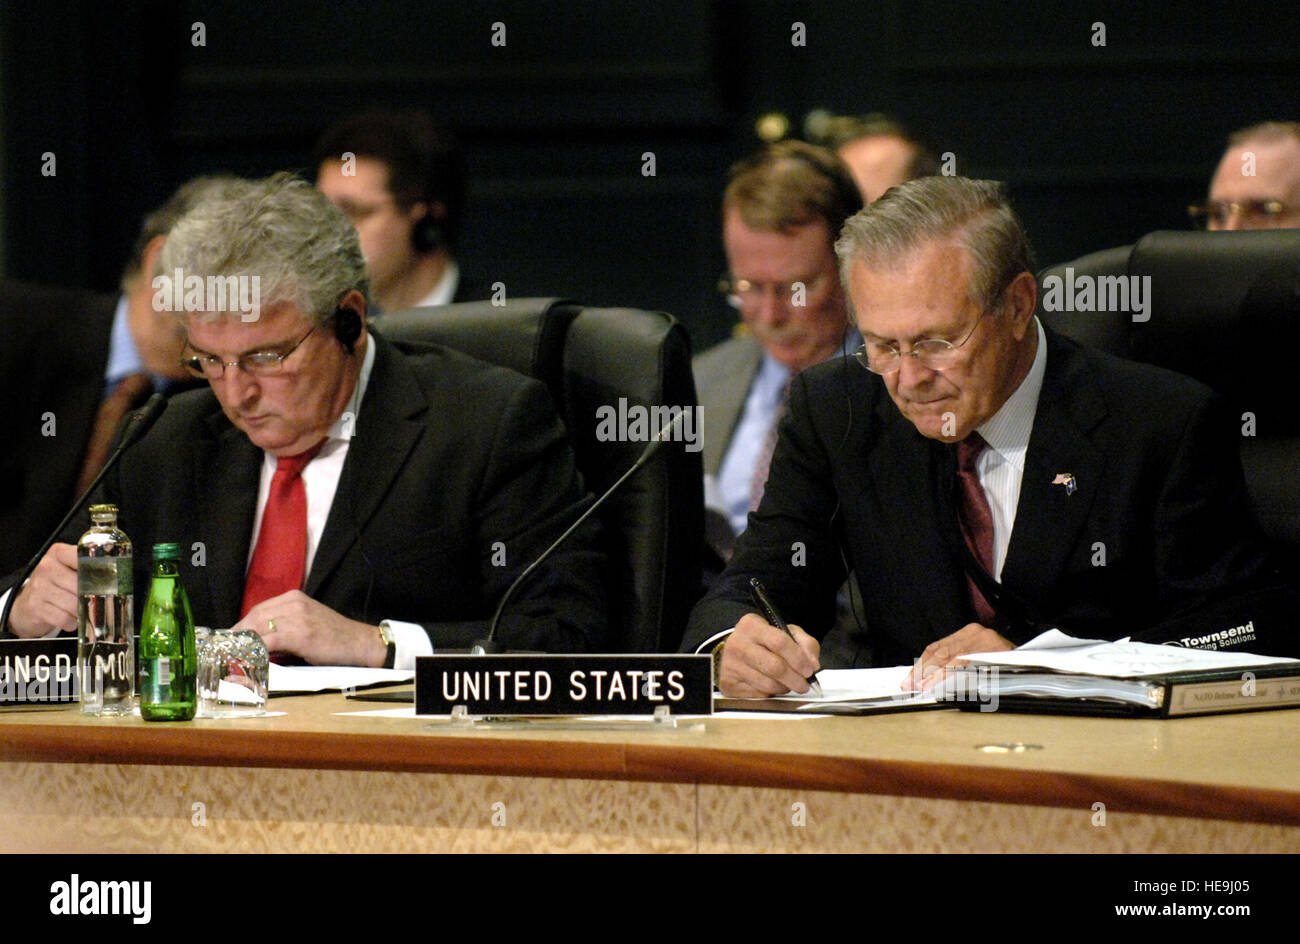 Minitser of Defense Des Browne (L) from the United Kingdom and Secretary of Defense Donald H. Rumsfeld listen to remarks during the NATO-Russia Council meeting, while at Portoroz, Slovenia, Sept. 29, 2006. Secretary Rumsfeld is visiting Slovenia to attend the NATO Defense Ministerial and conduct bilateral discussions with Slovenian leaders. Defense Dept.  James M. Bowman. (Released) Stock Photo